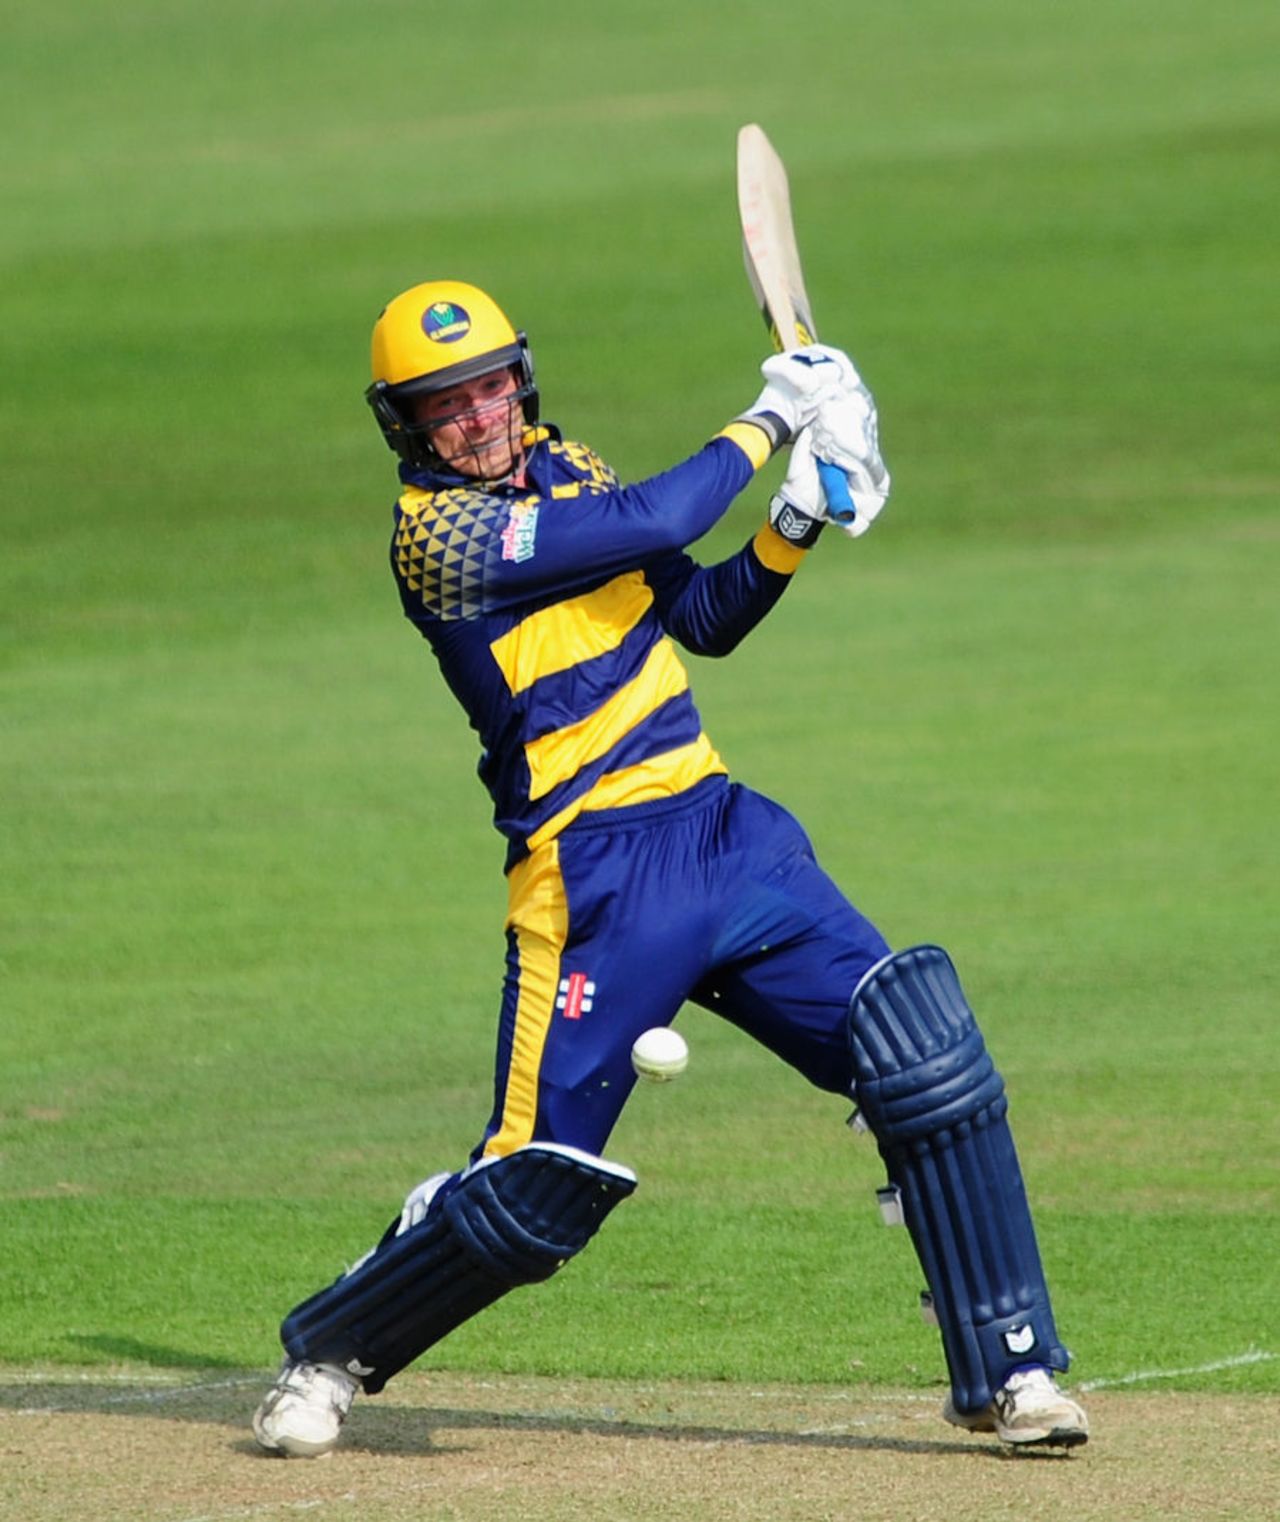 Graham Wagg hits out for Glamorgan, Glamorgan v Gloucestershire, Royal London One-Day Cup, Cardiff, June 6, 2016